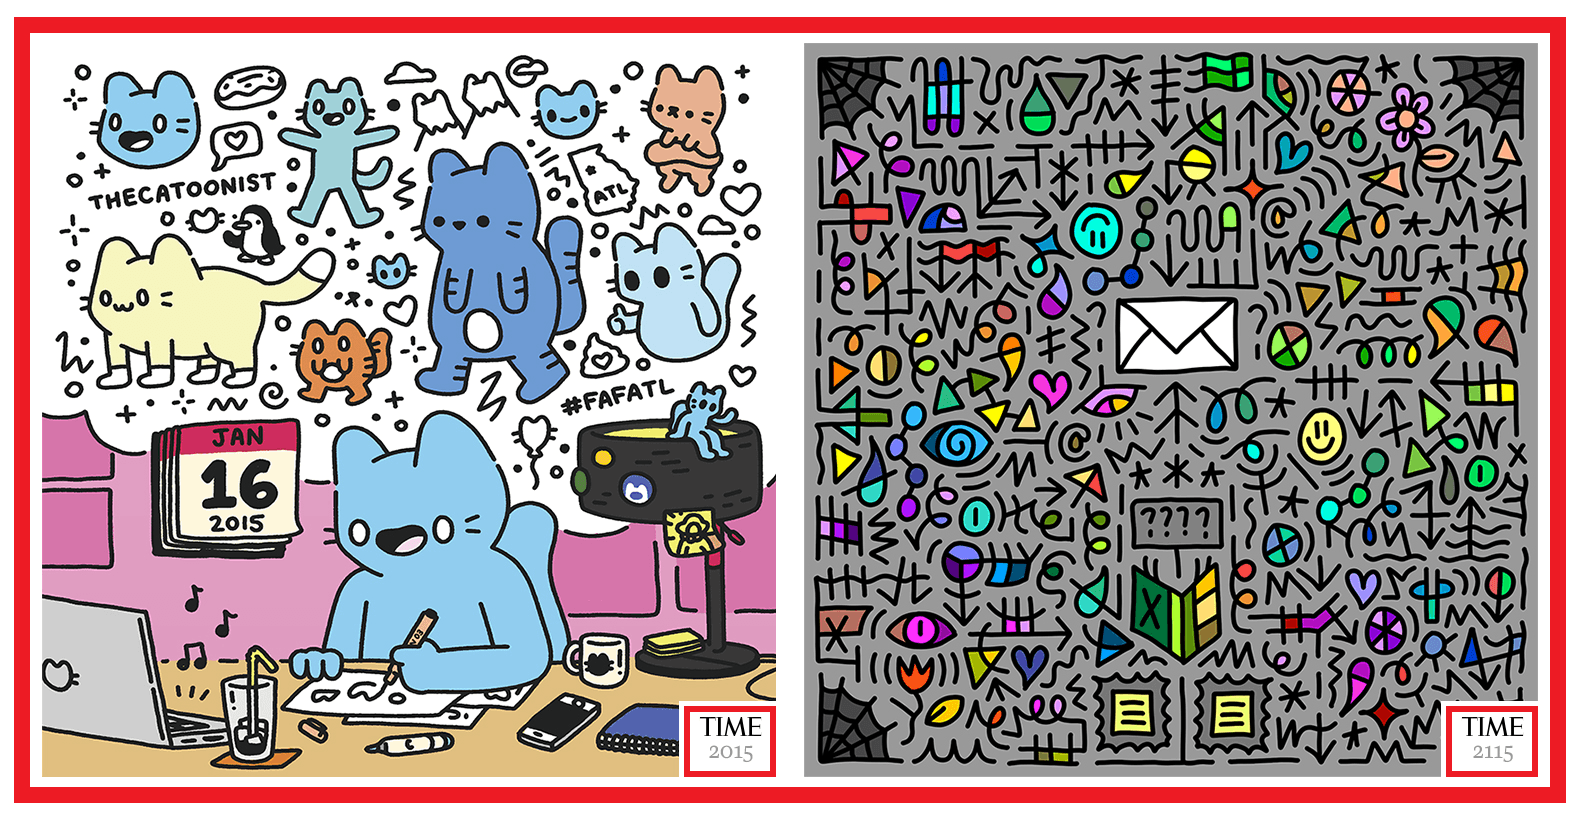 Blue Cat, 2015 by Colin Egan & Send More Mail, 2115 by Vinnie Hager